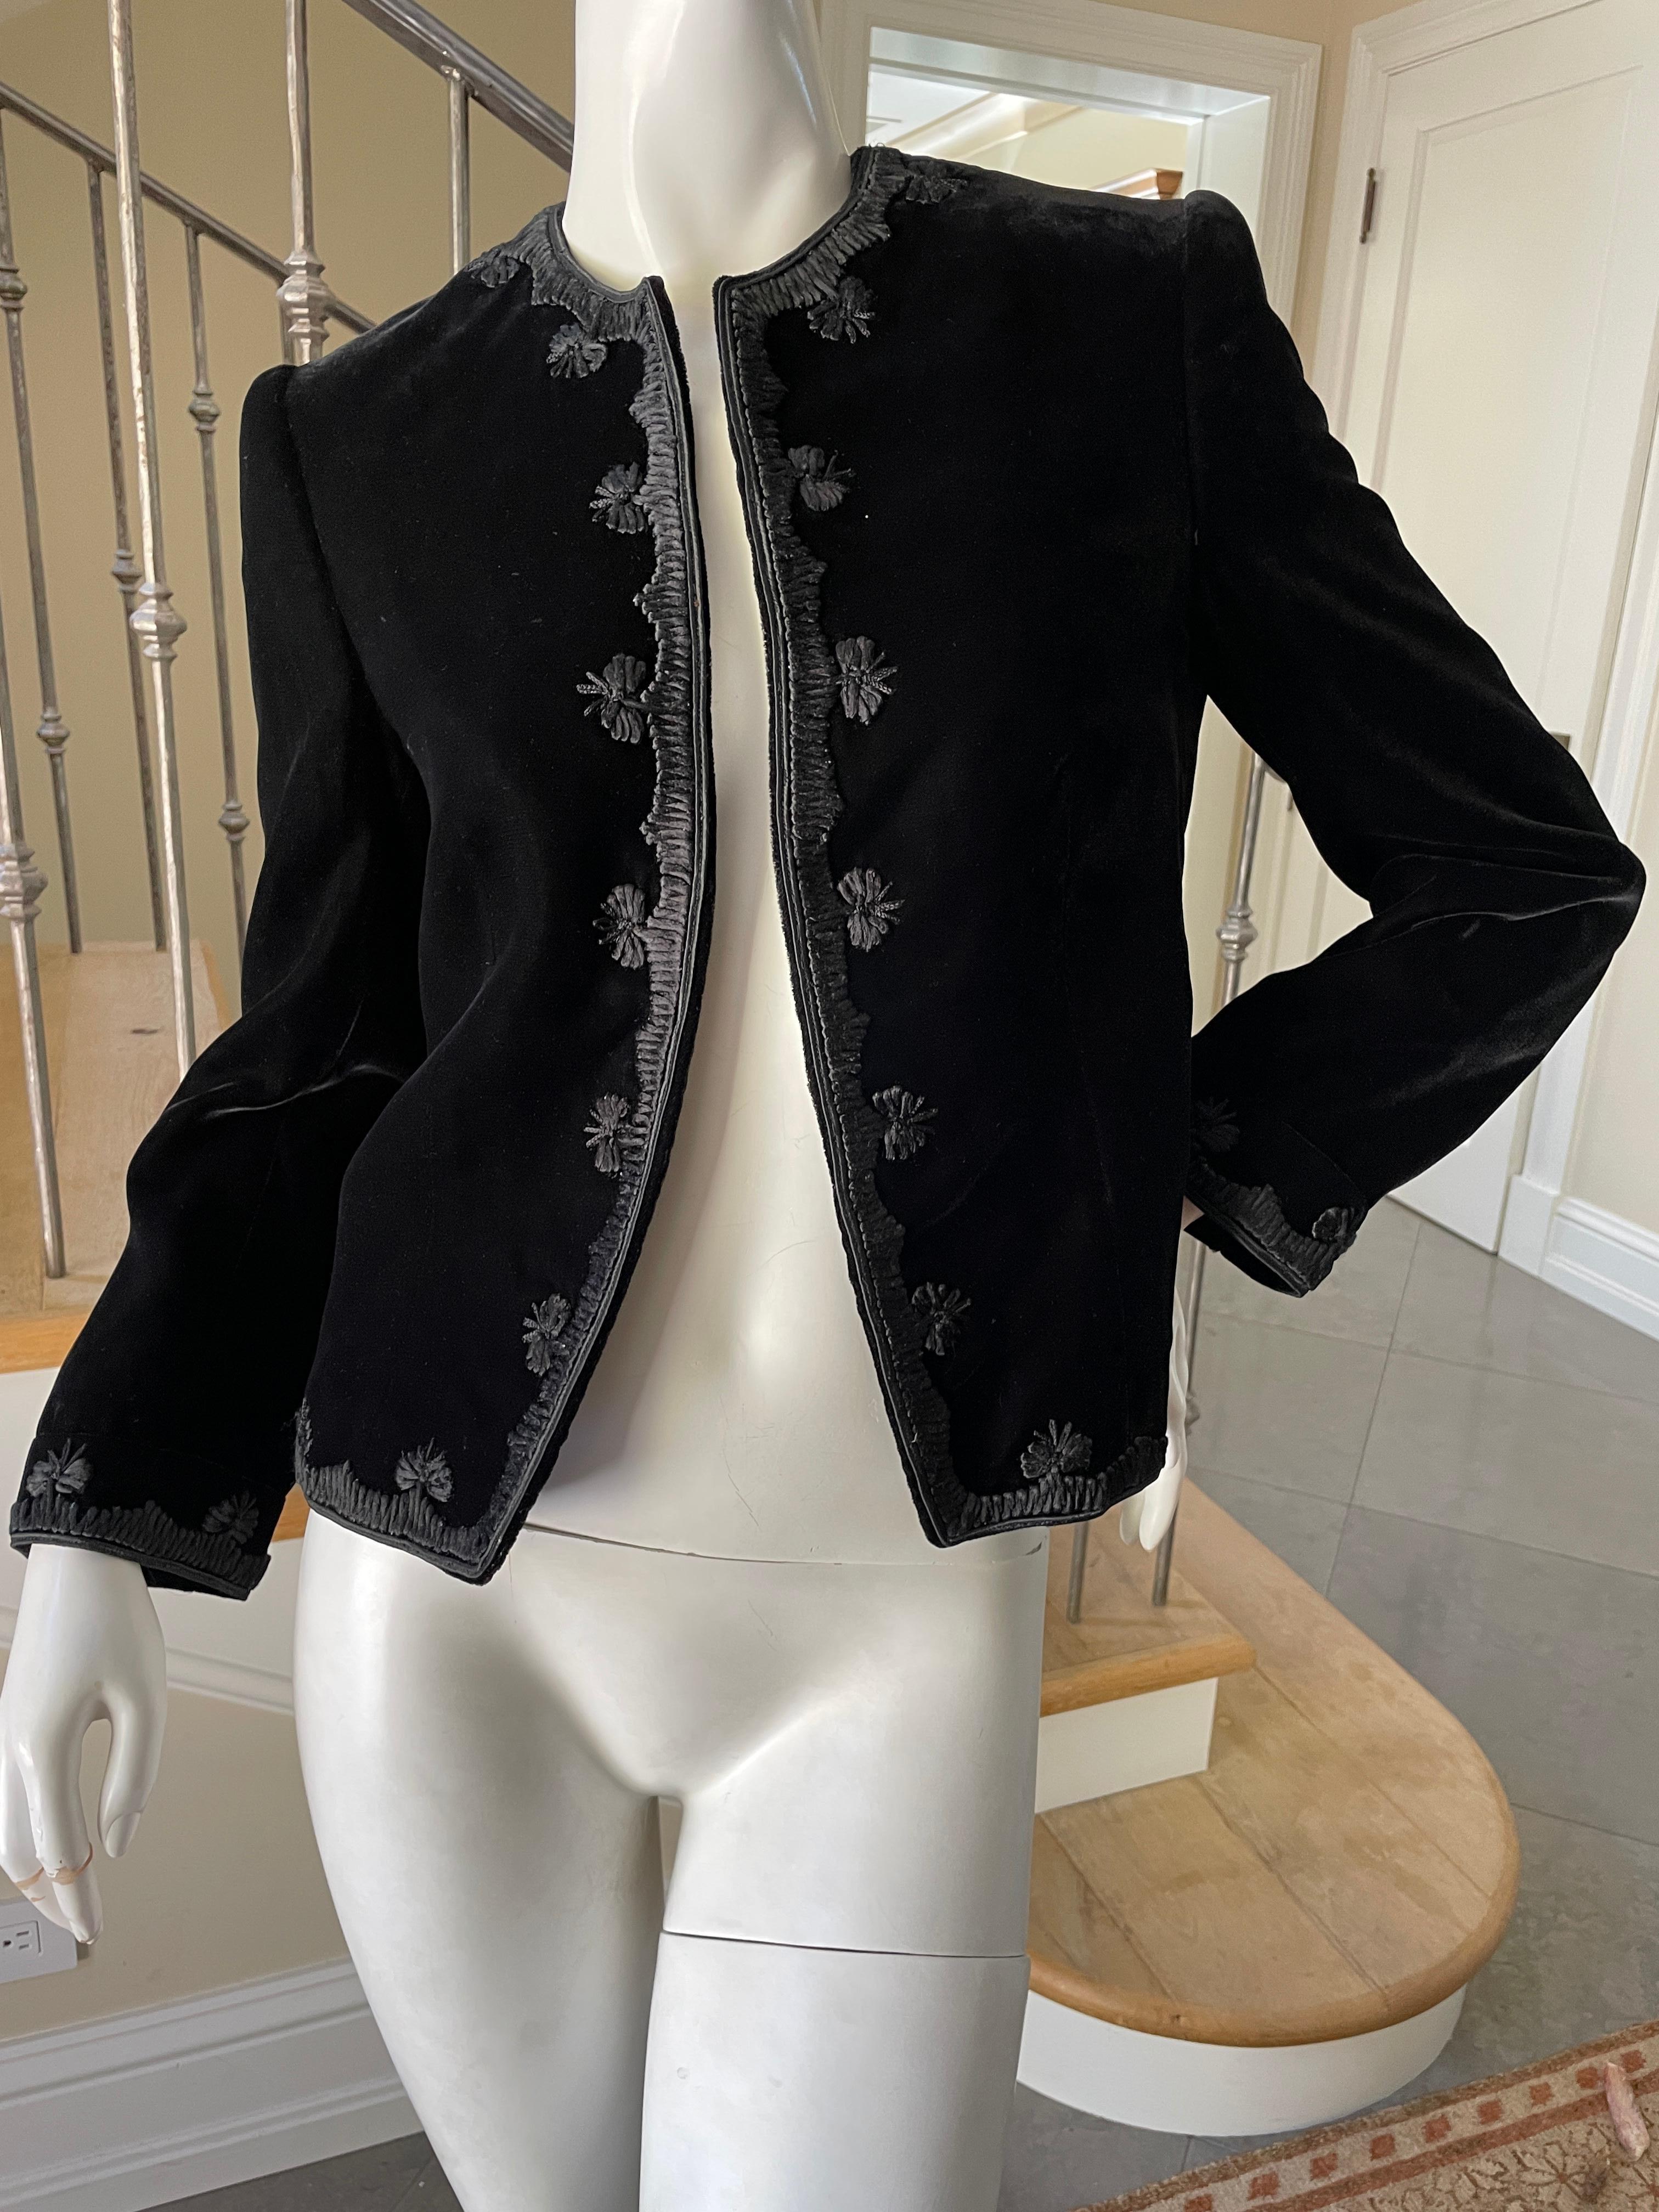 Jean-Louis Couture 1960's Black Velvet Jacket with Embroidered Details For Sale 5